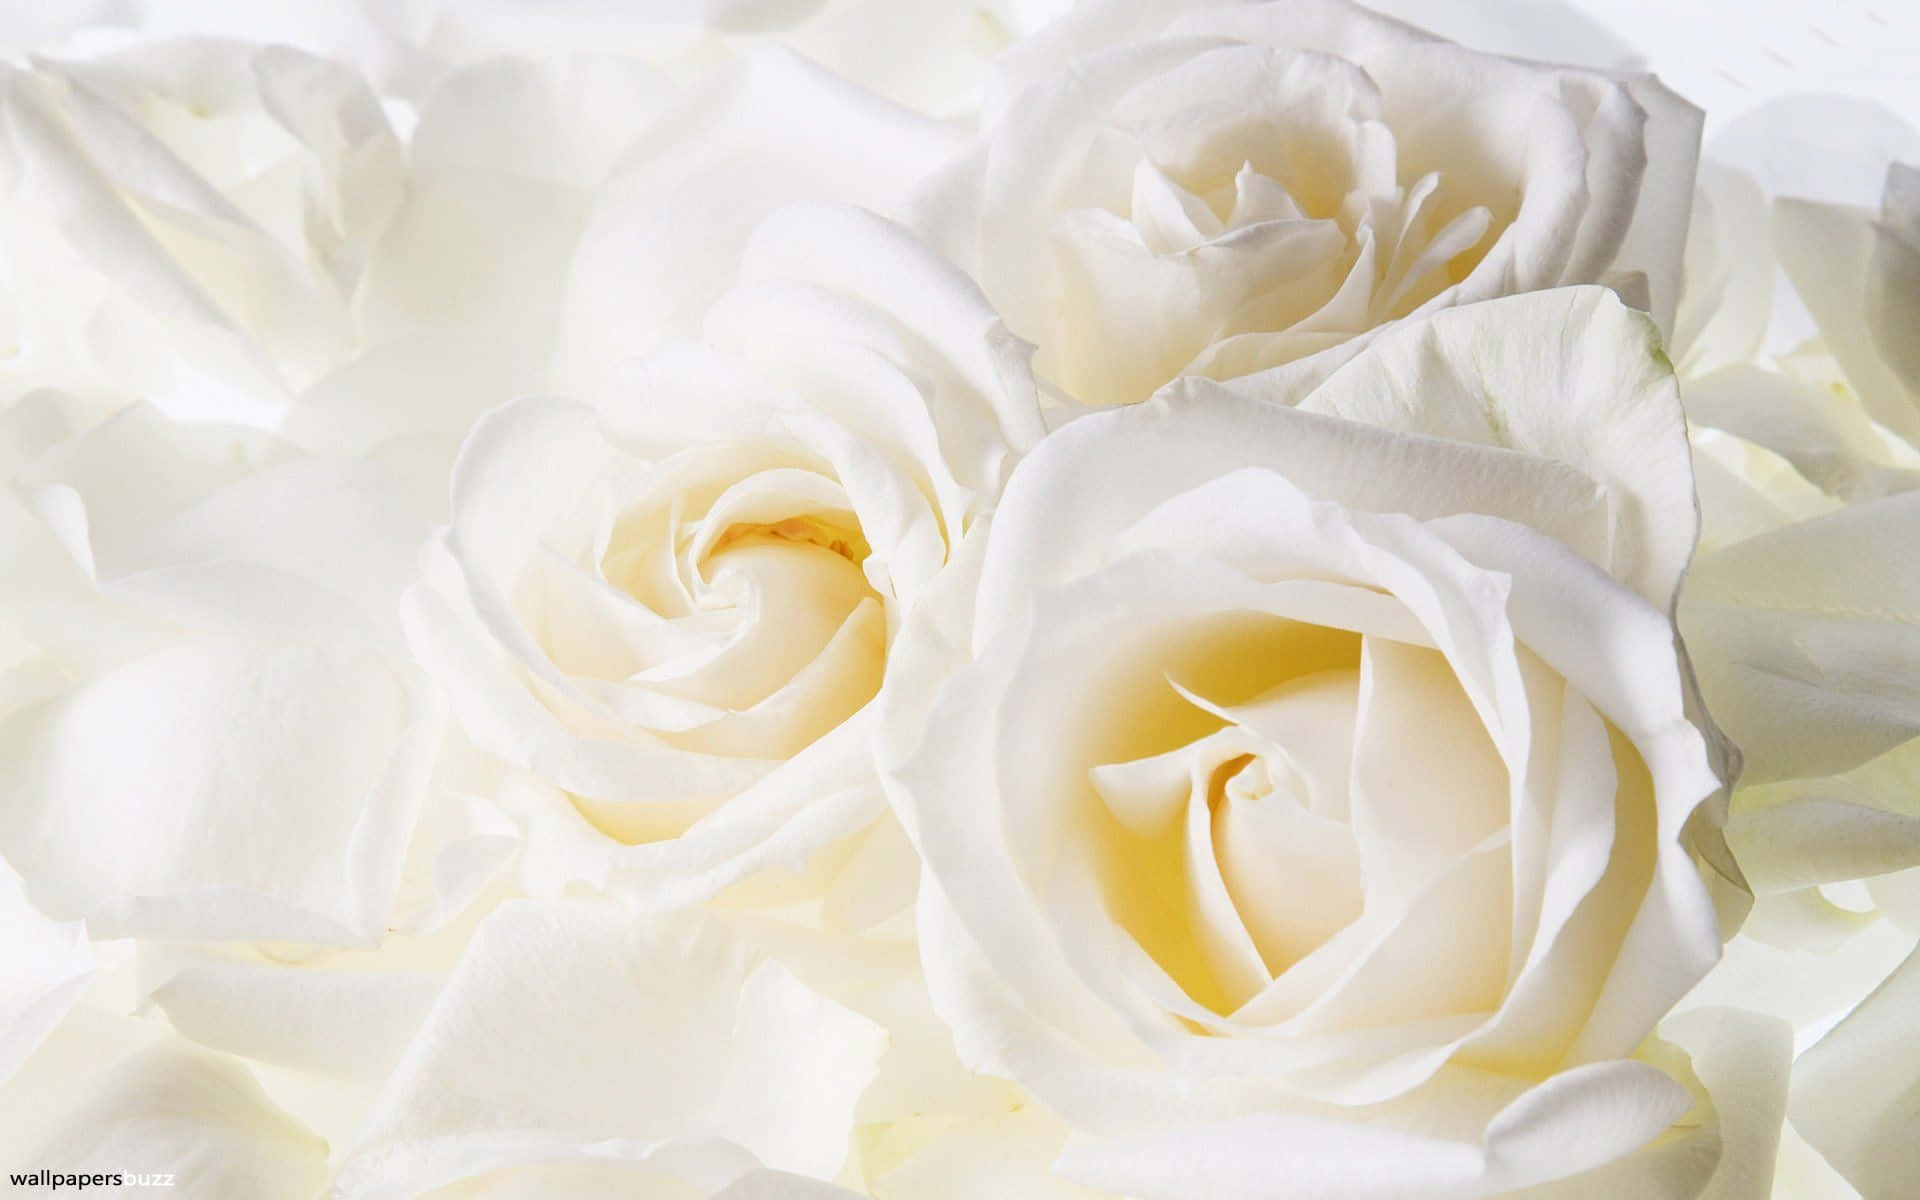 A Vibrant White Rose Captures Attention In The Garden